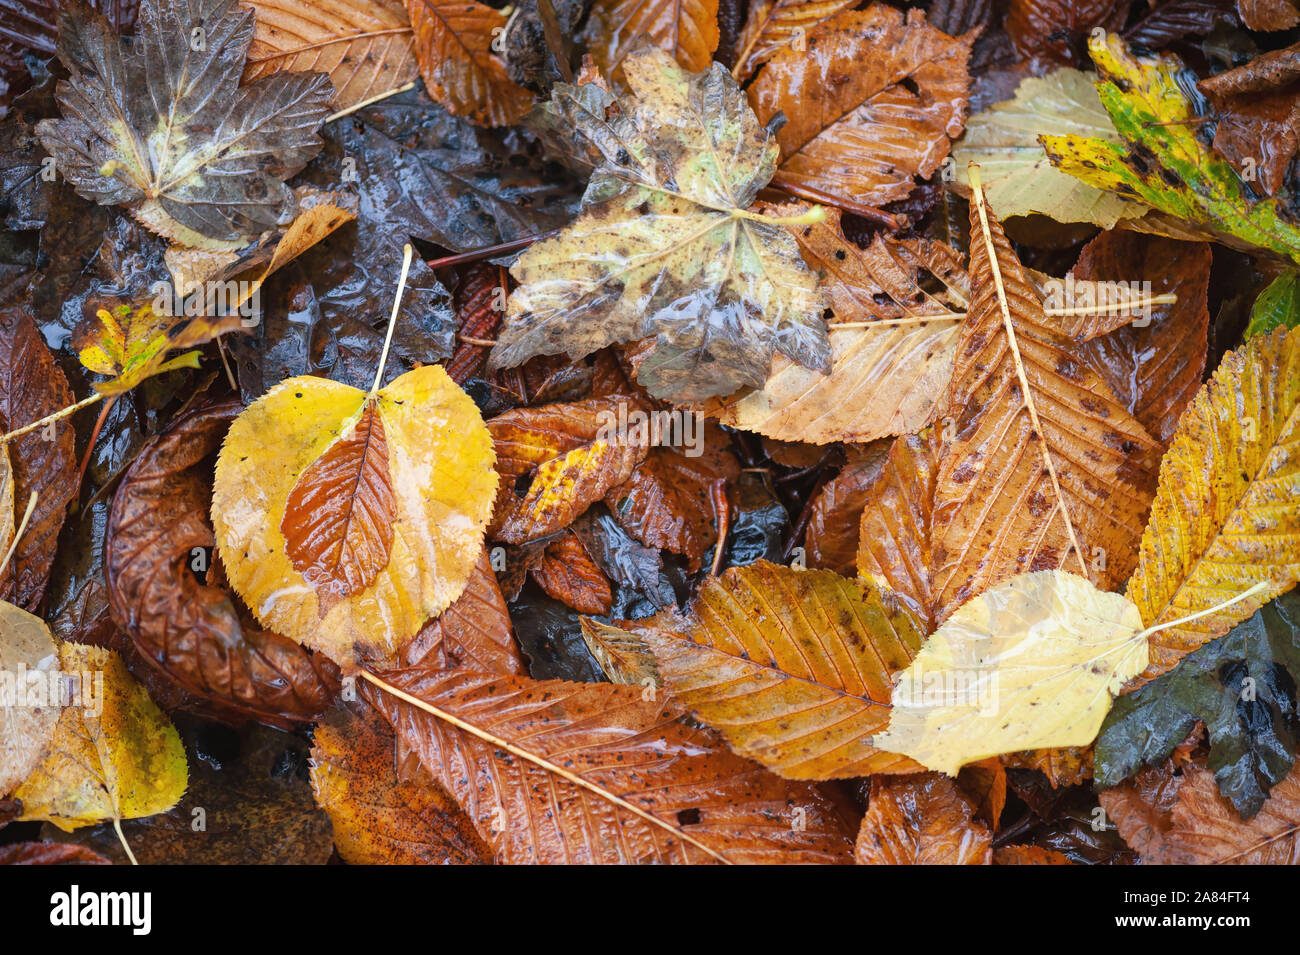 Fallen autumn leaves forming leaf litter. Stock Photo